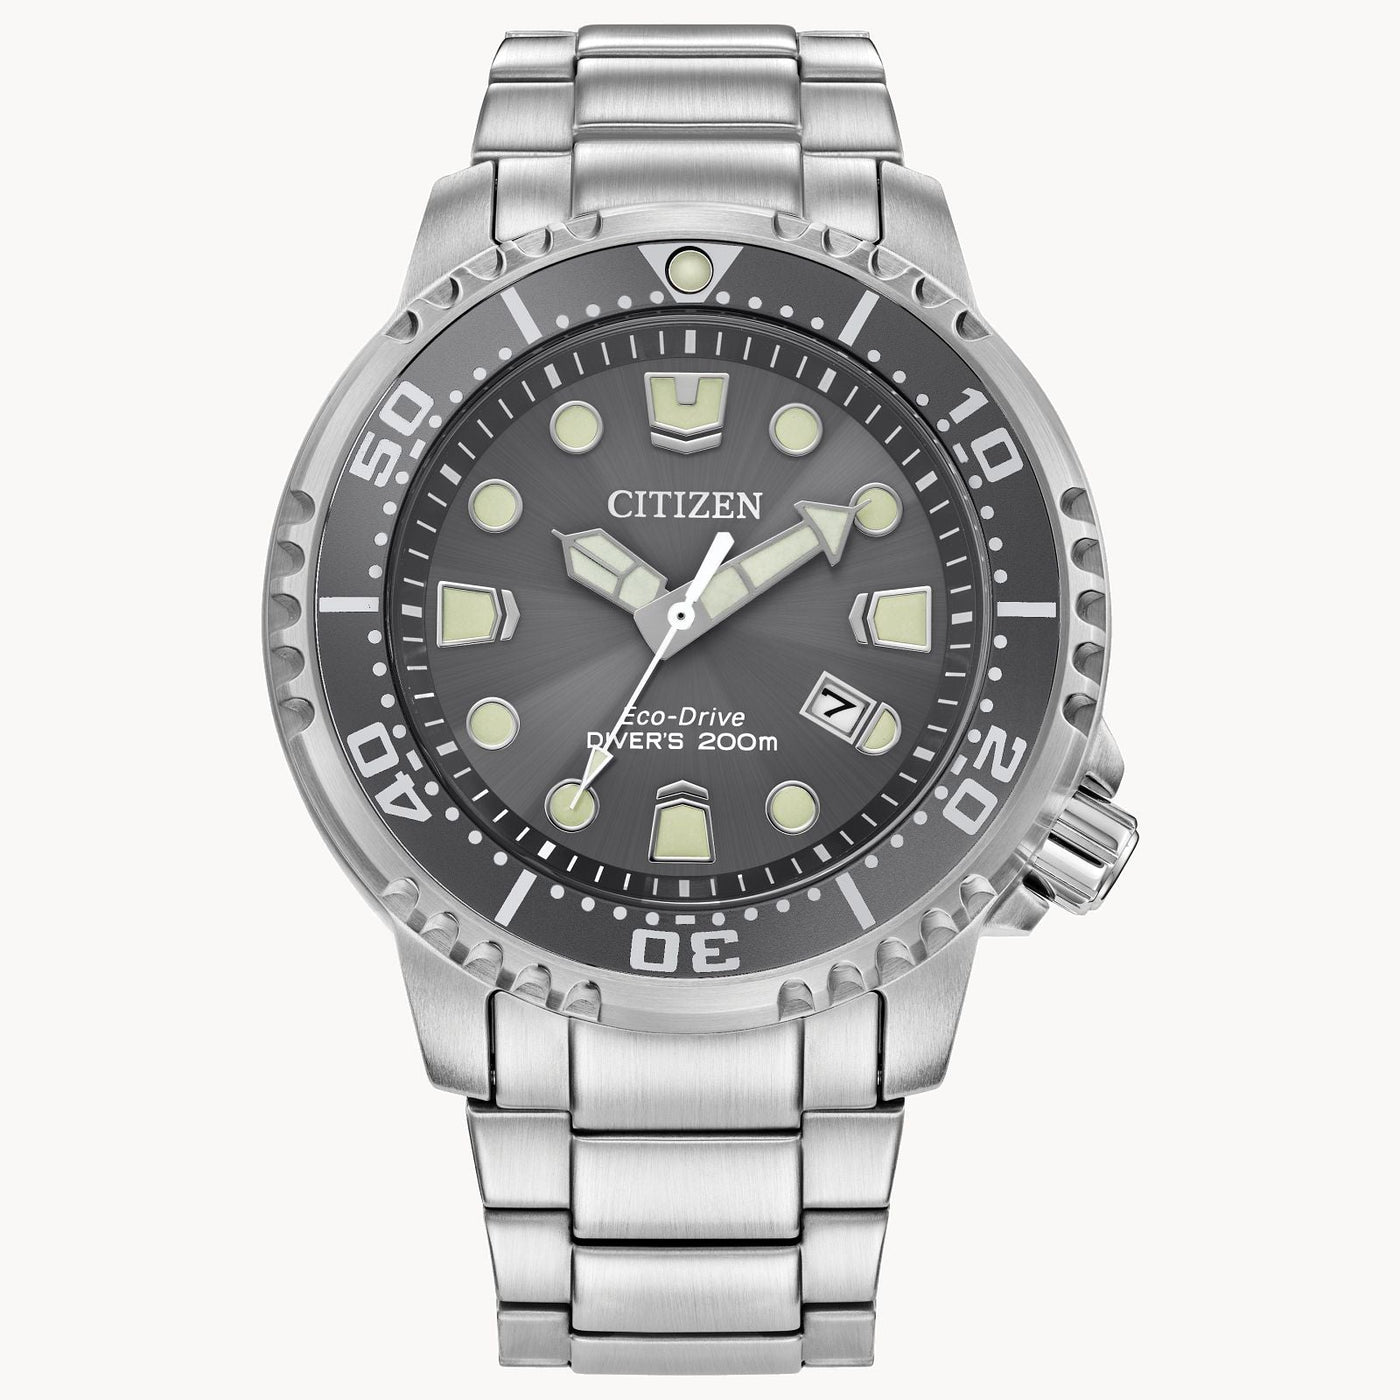 Citizen Promaster Dive 200m Eco-Drive Stainless Steel Watch with a Gray Sunray Dial